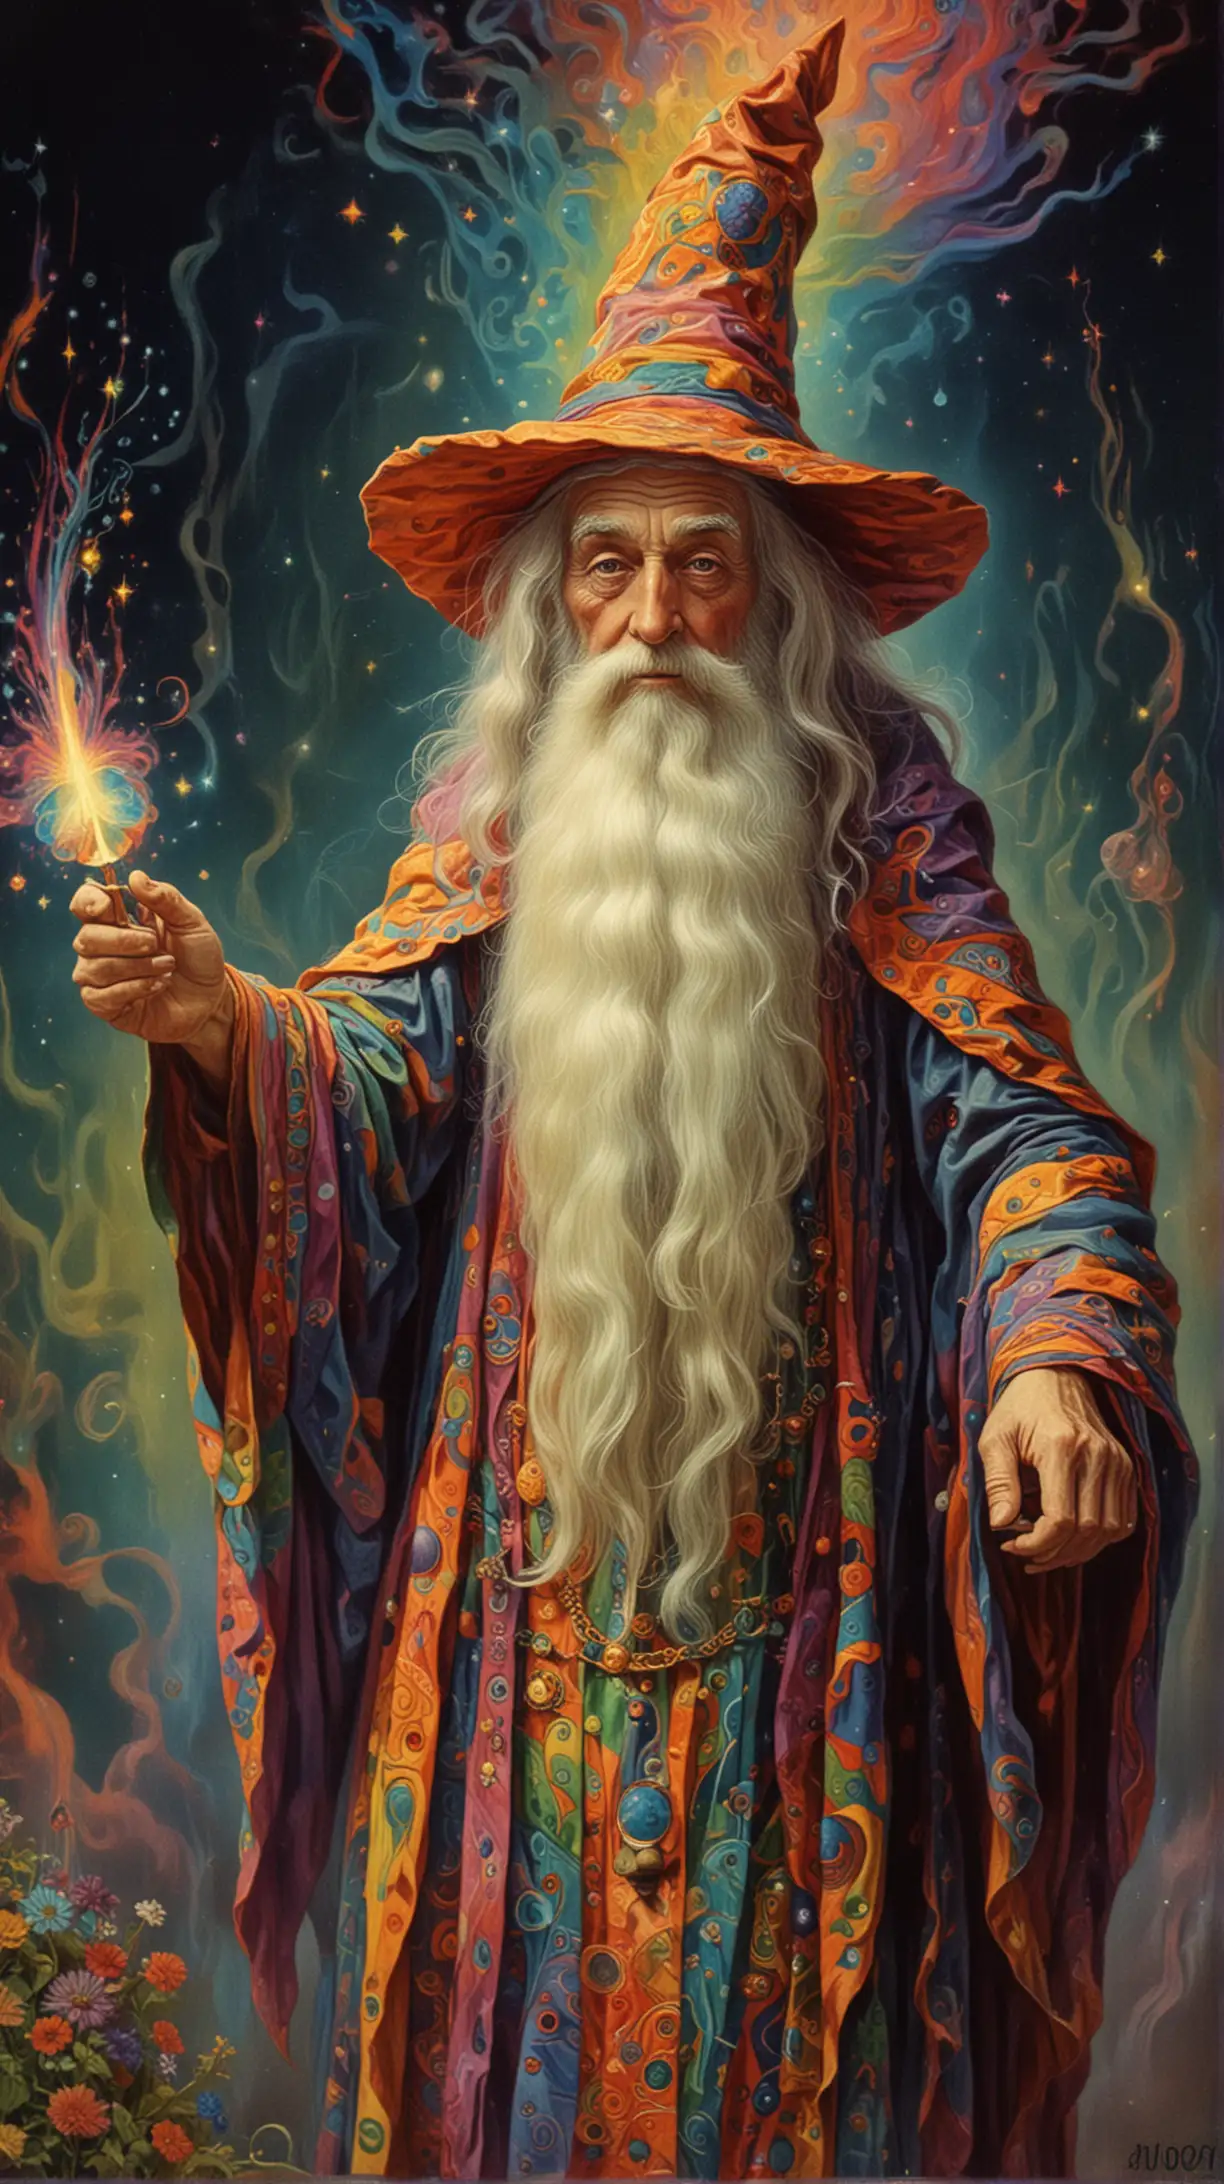 a psychedelic Wizard from 1920